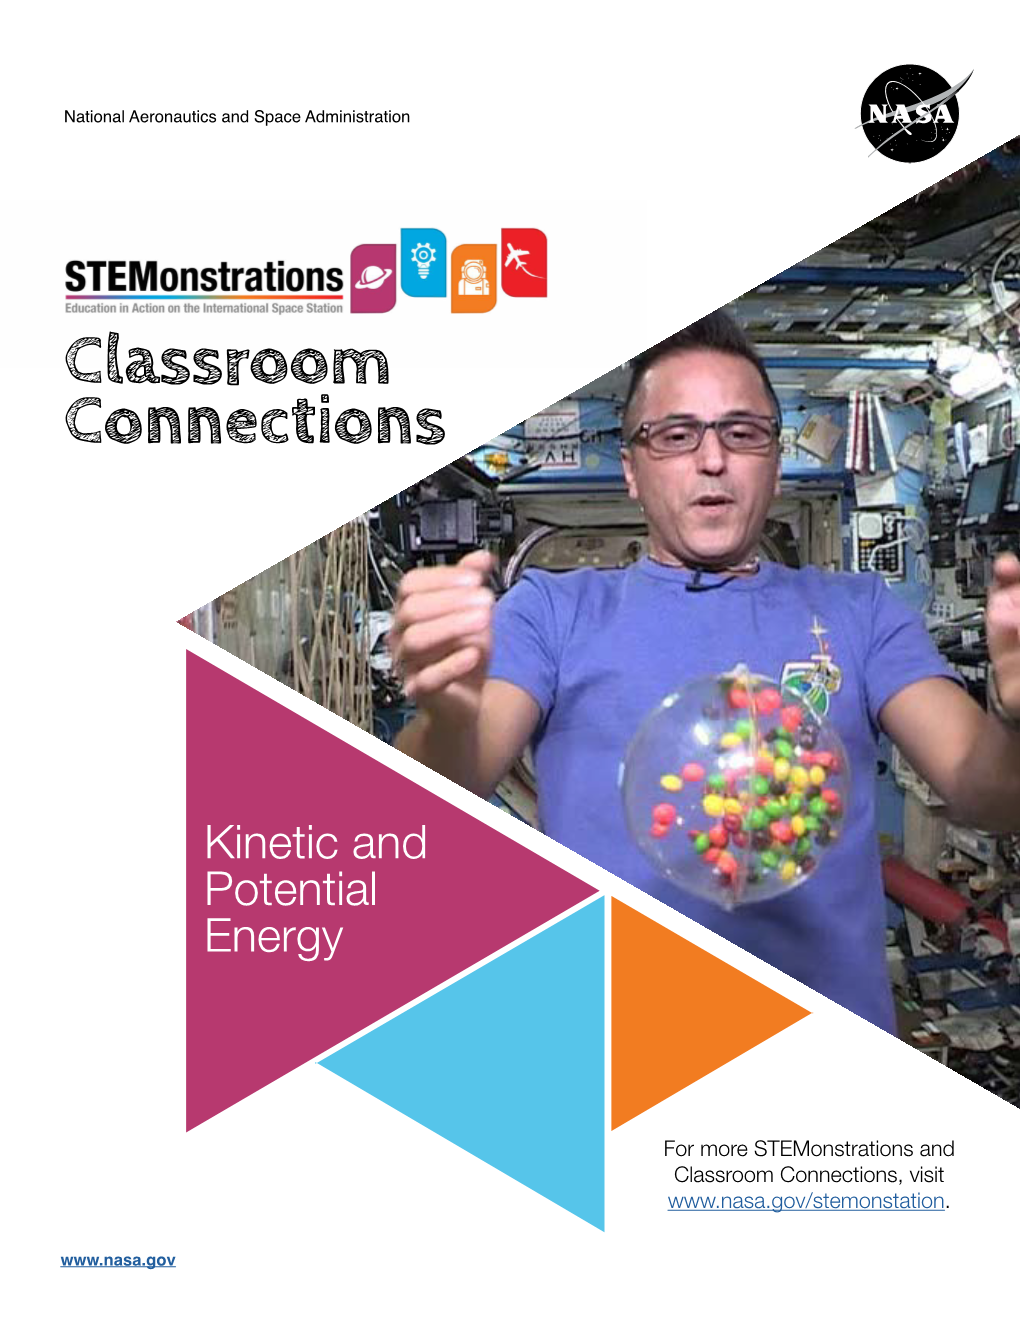 Stemonstrations and Classroom Connections, Visit